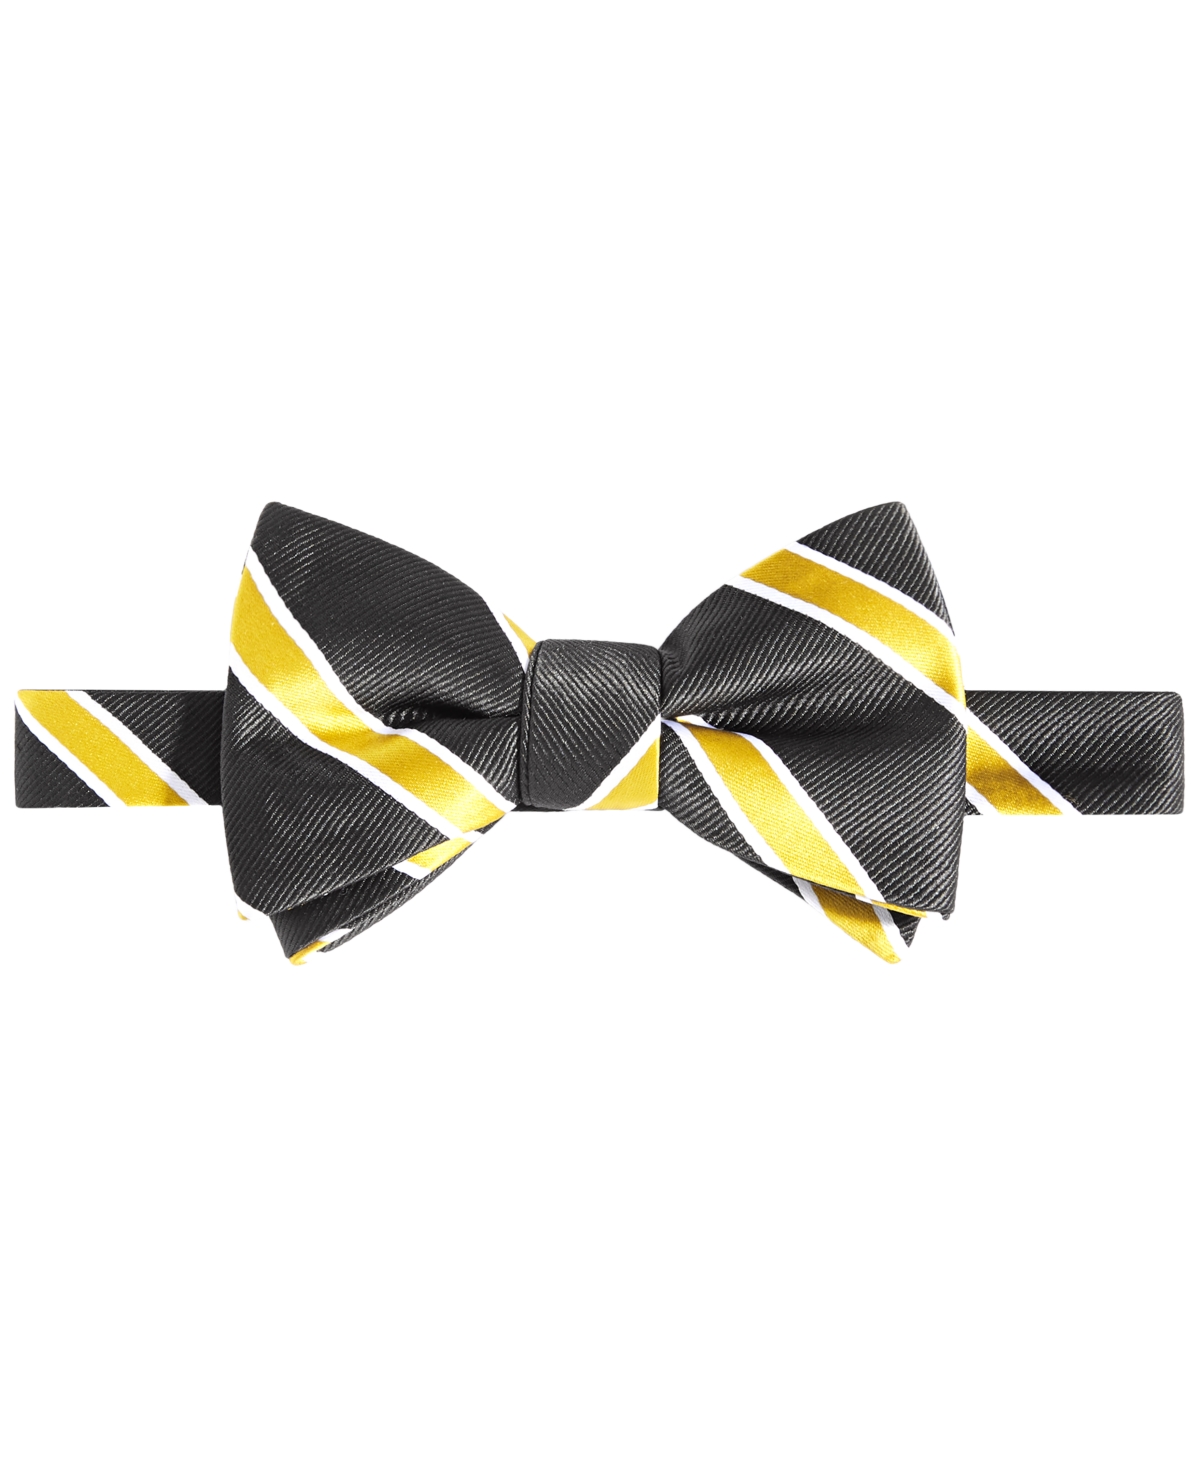 Shop Tayion Collection Men's Black & Gold Stripe Bow Tie